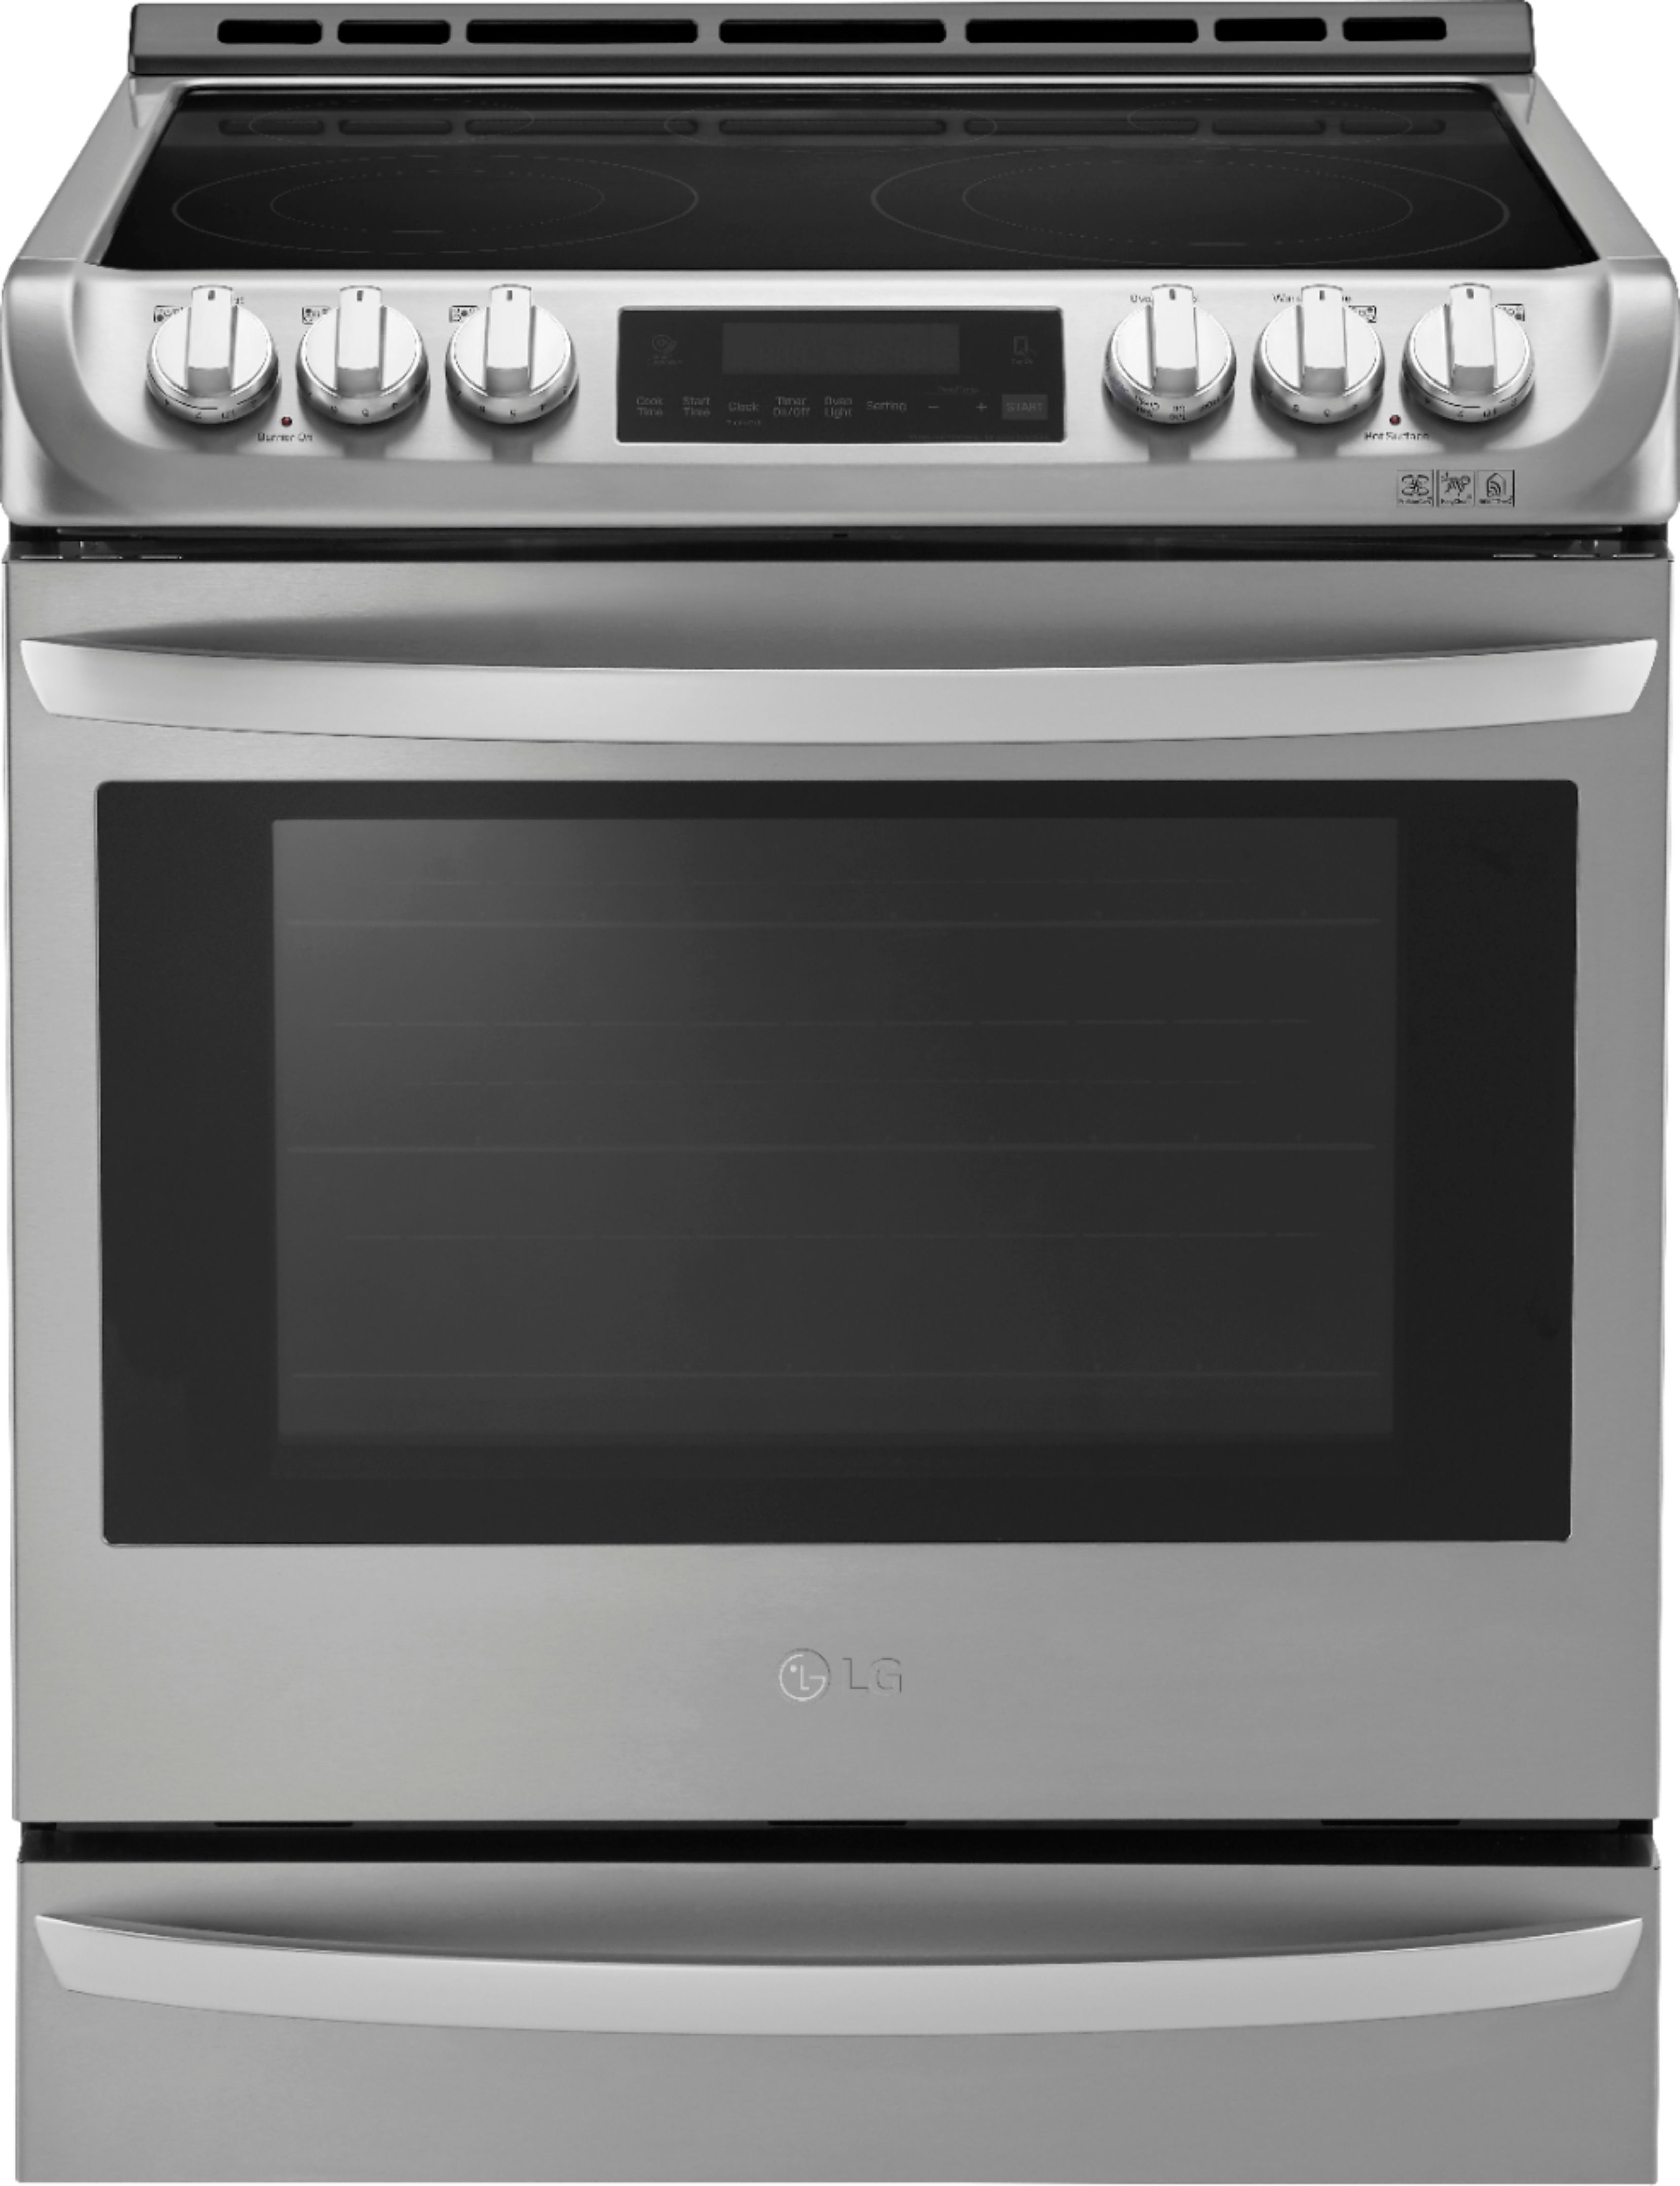 LG – 6.3 Cu. Ft. Self-Cleaning Slide-In Electric Range with ProBake Convection – Stainless steel